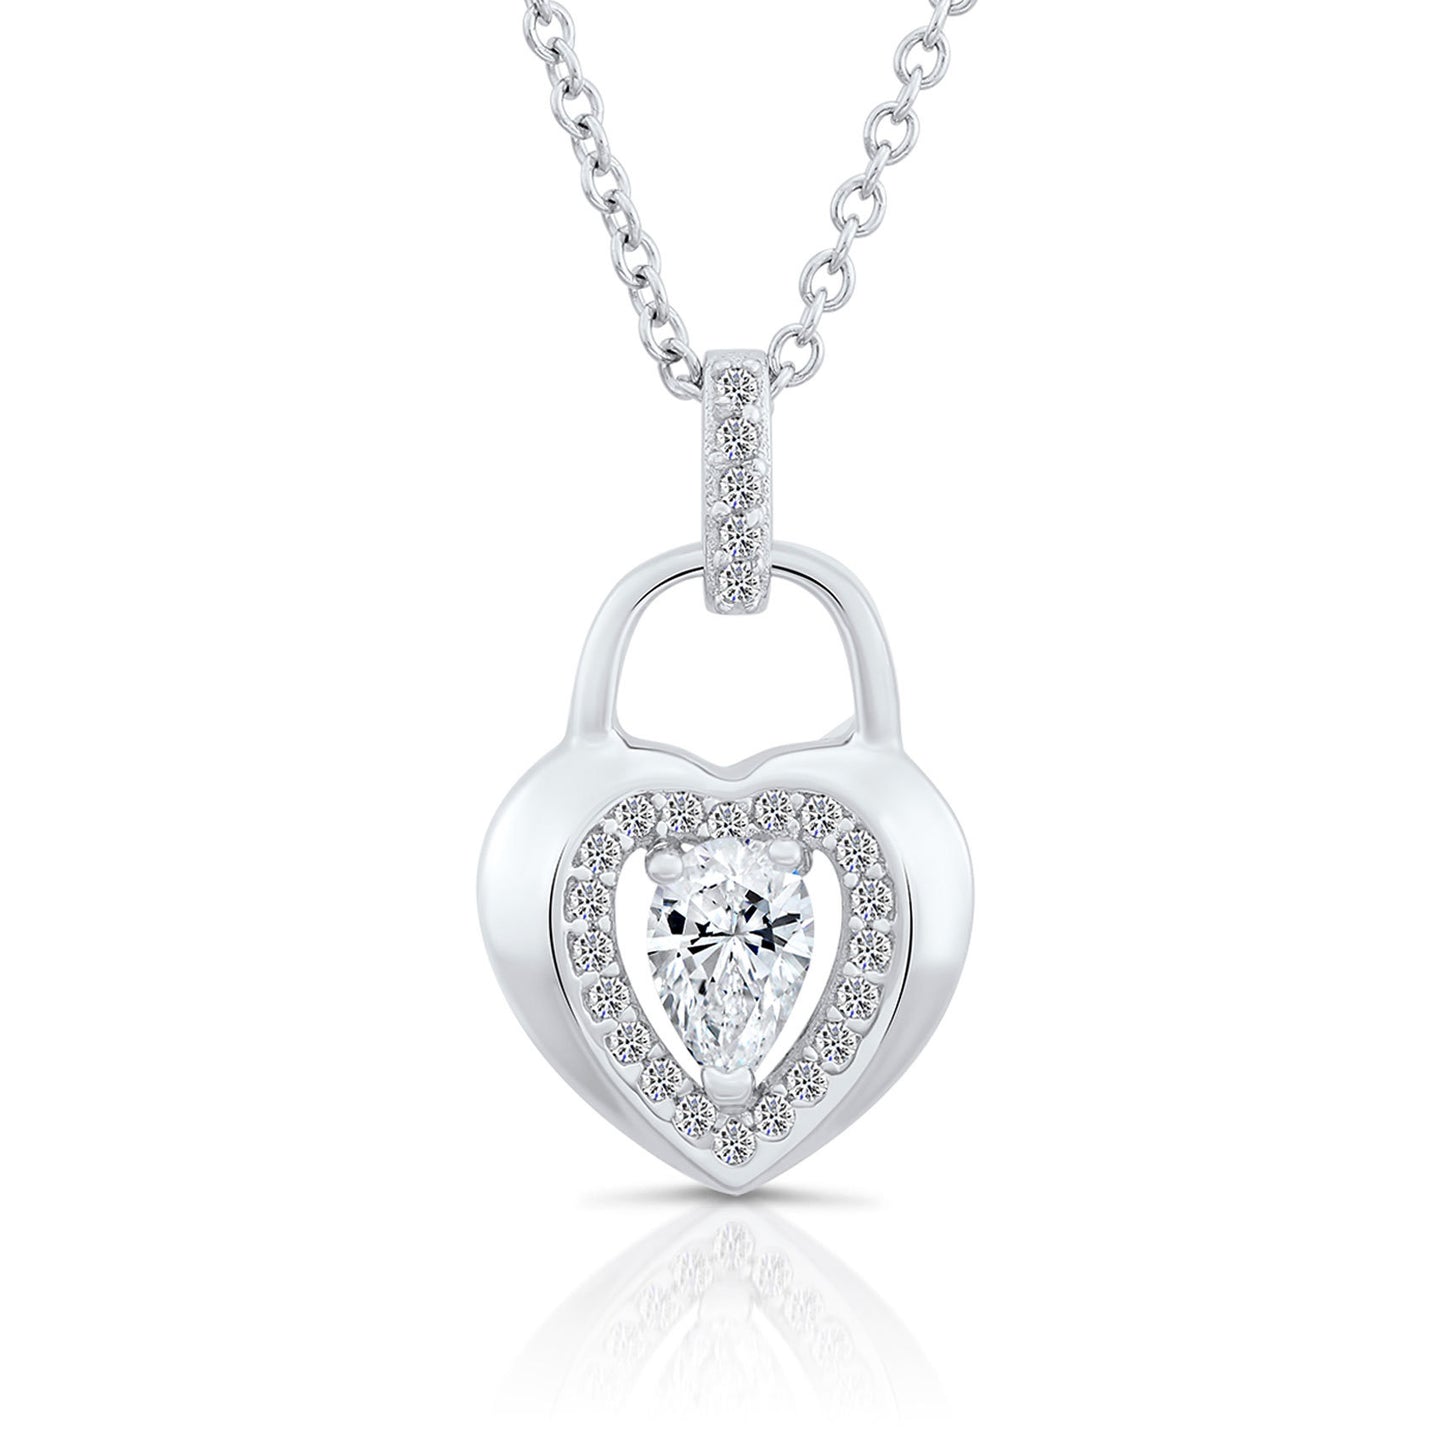 Sterling Silver Heart Lock Necklace